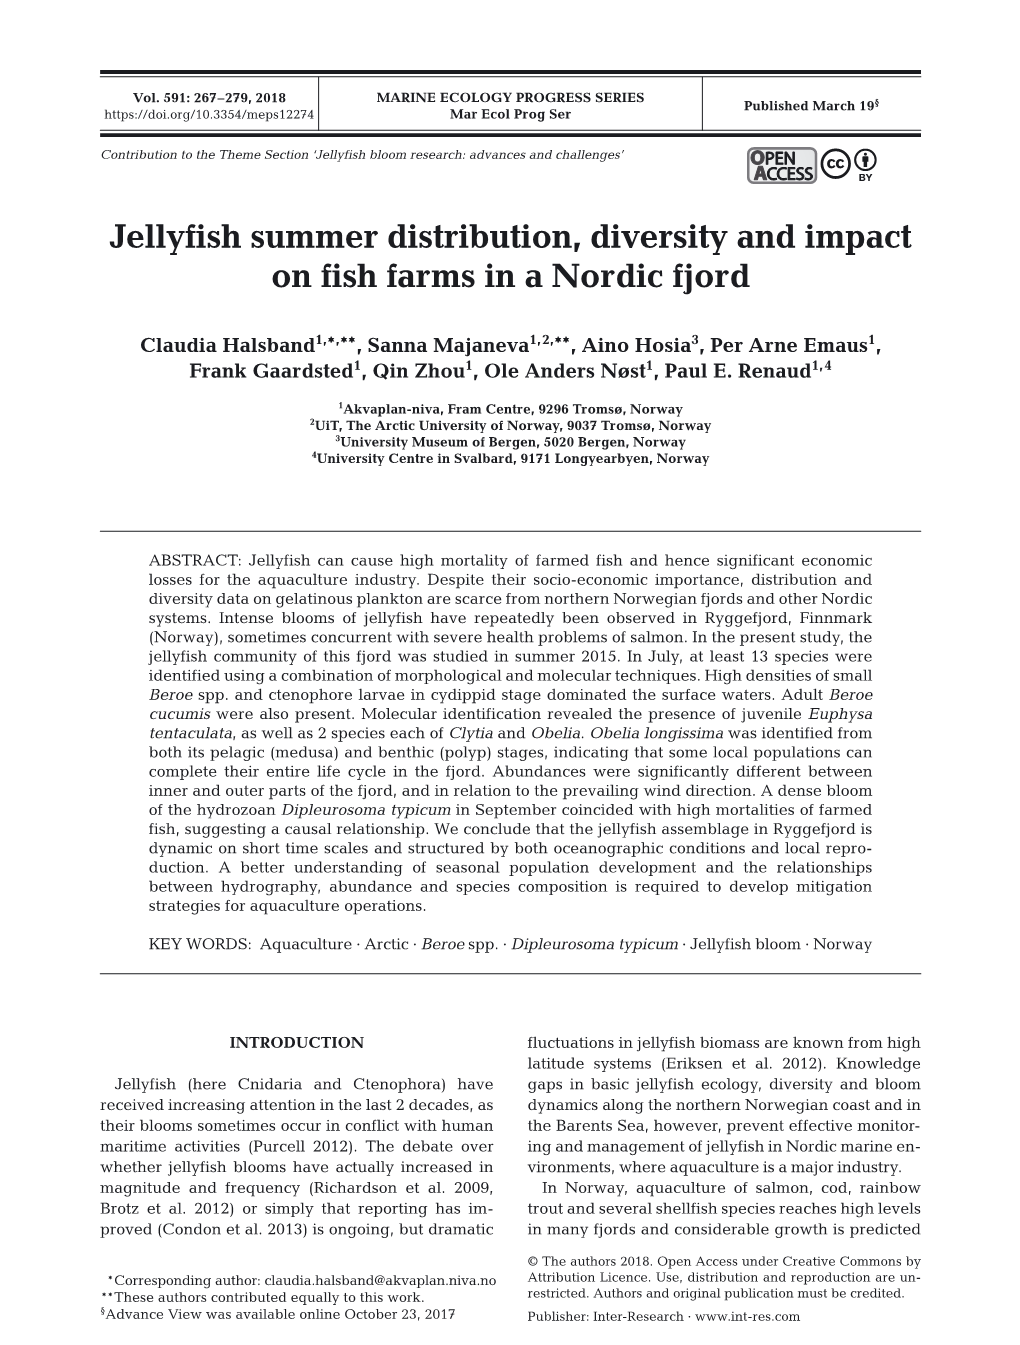 Jellyfish Summer Distribution, Diversity and Impact on Fish Farms in a Nordic Fjord